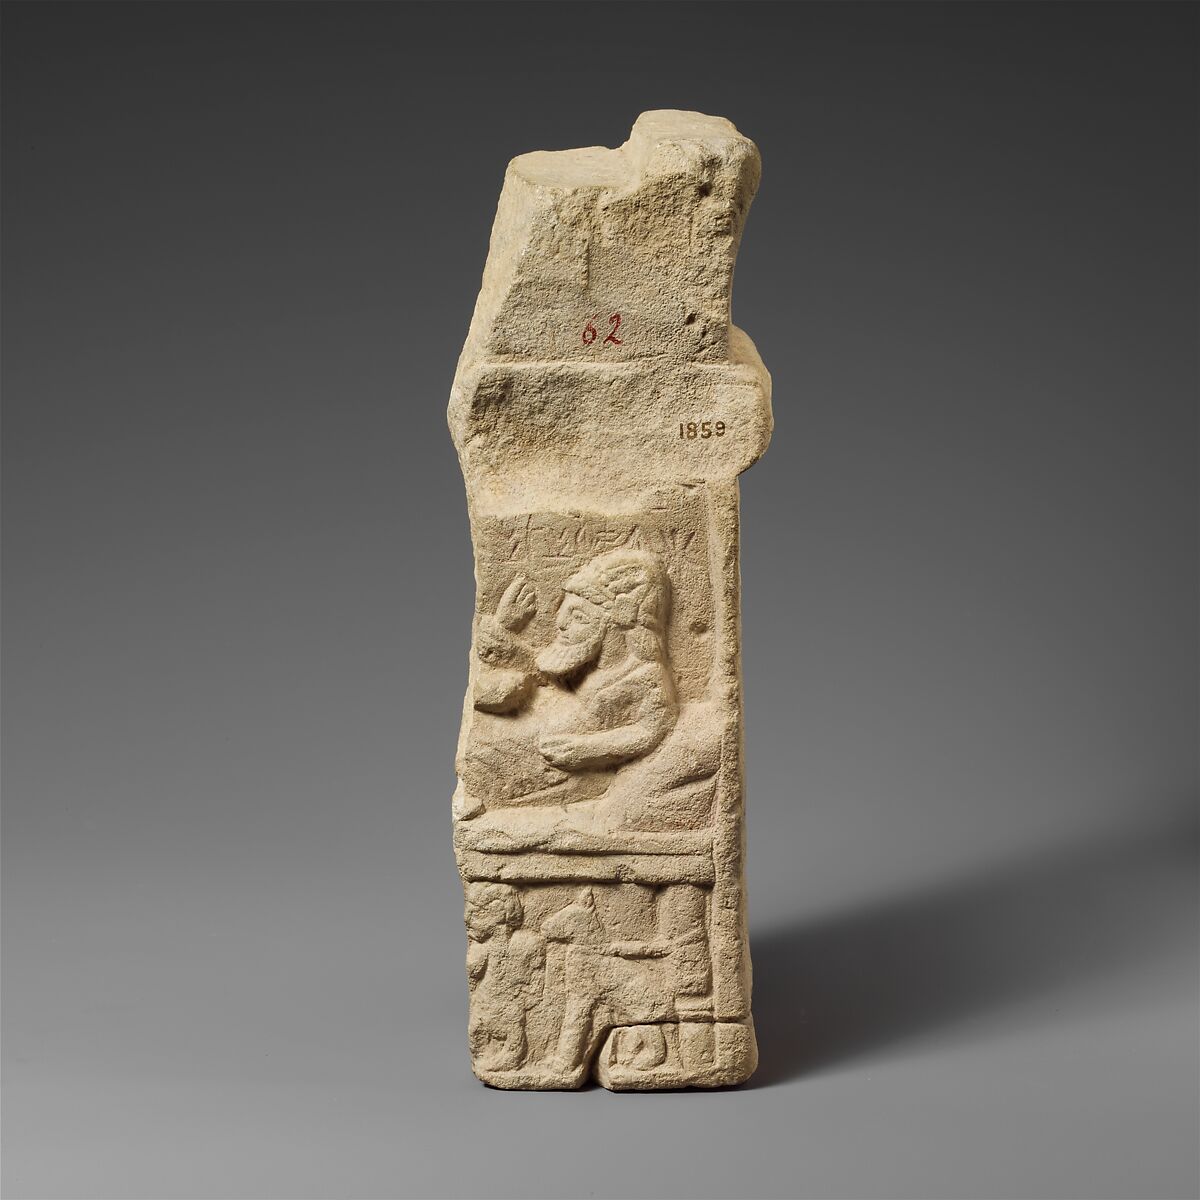 Limestone fragment of an altar with a relief, Limestone, Cypriot 